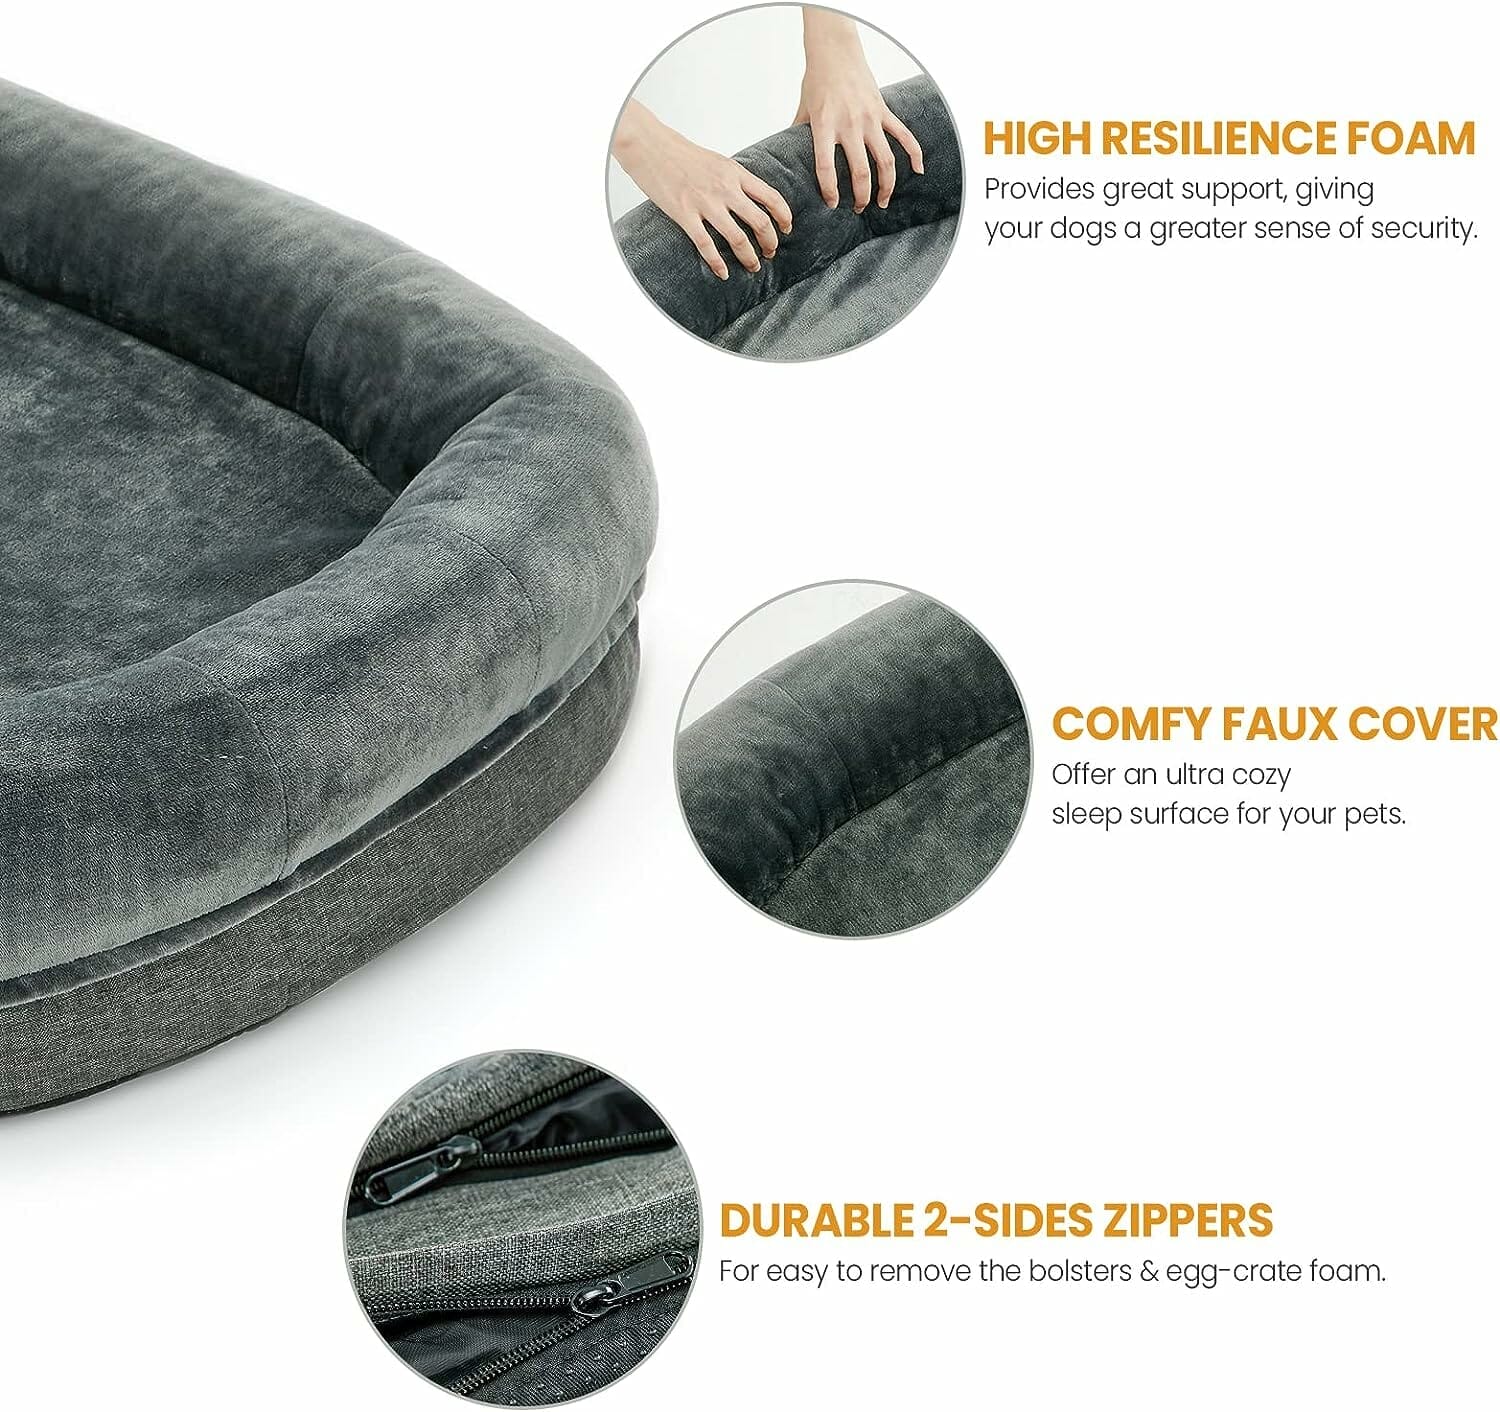 Yiruka Dog Beds for Large Dogs Review: Ideal for Your Big Pup?